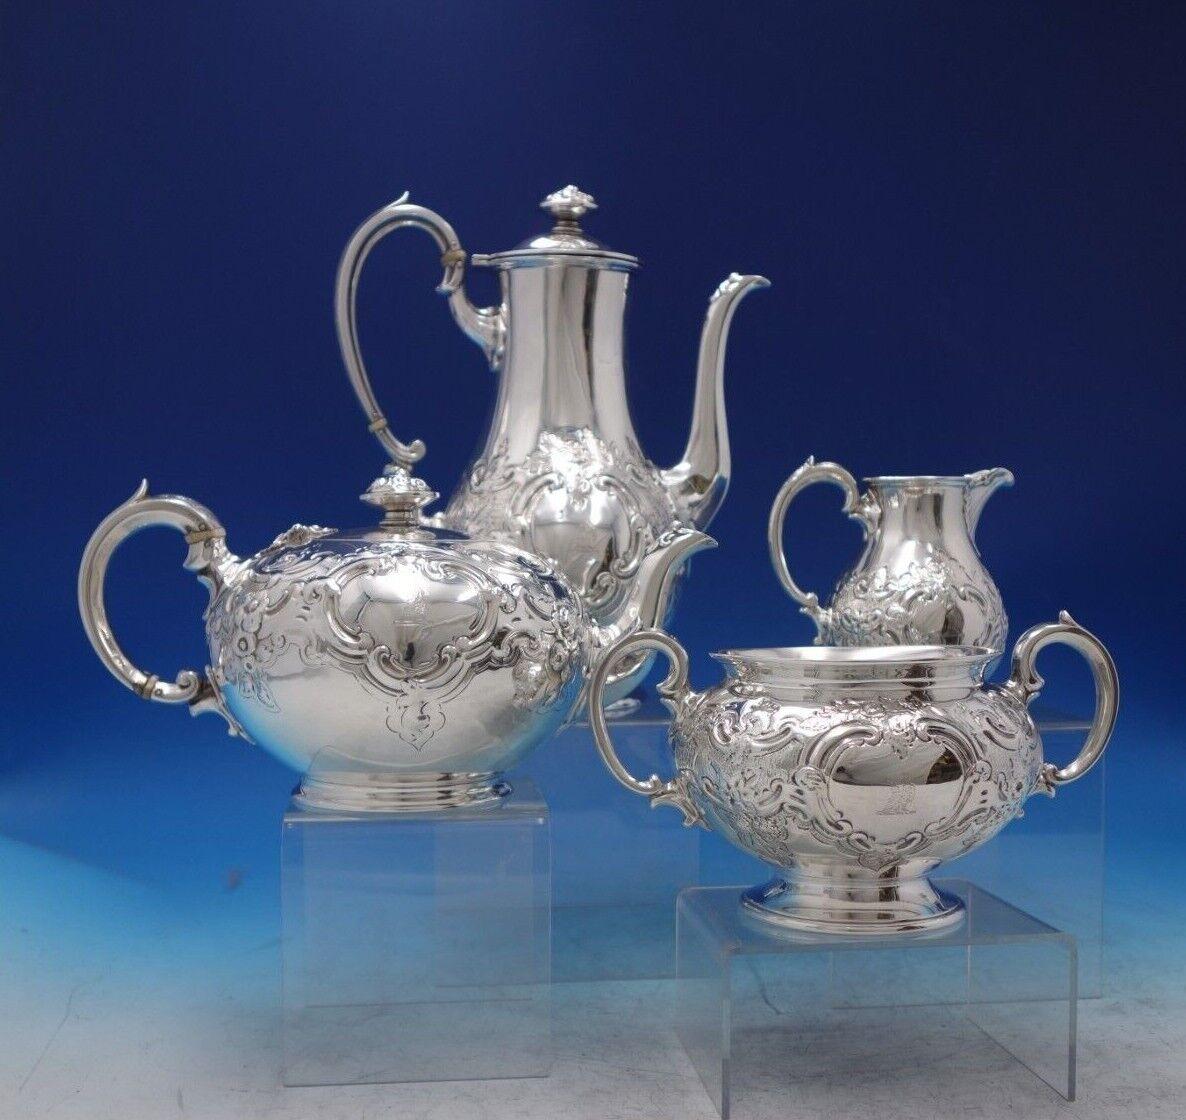 E and J Barnard and Freeman and Sons

Gorgeous E and J Barnard and Freeman and Sons English sterling silver four-piece tea set with lion crest (see photos). This set includes:

1 - Coffee pot: measures 10 1/4